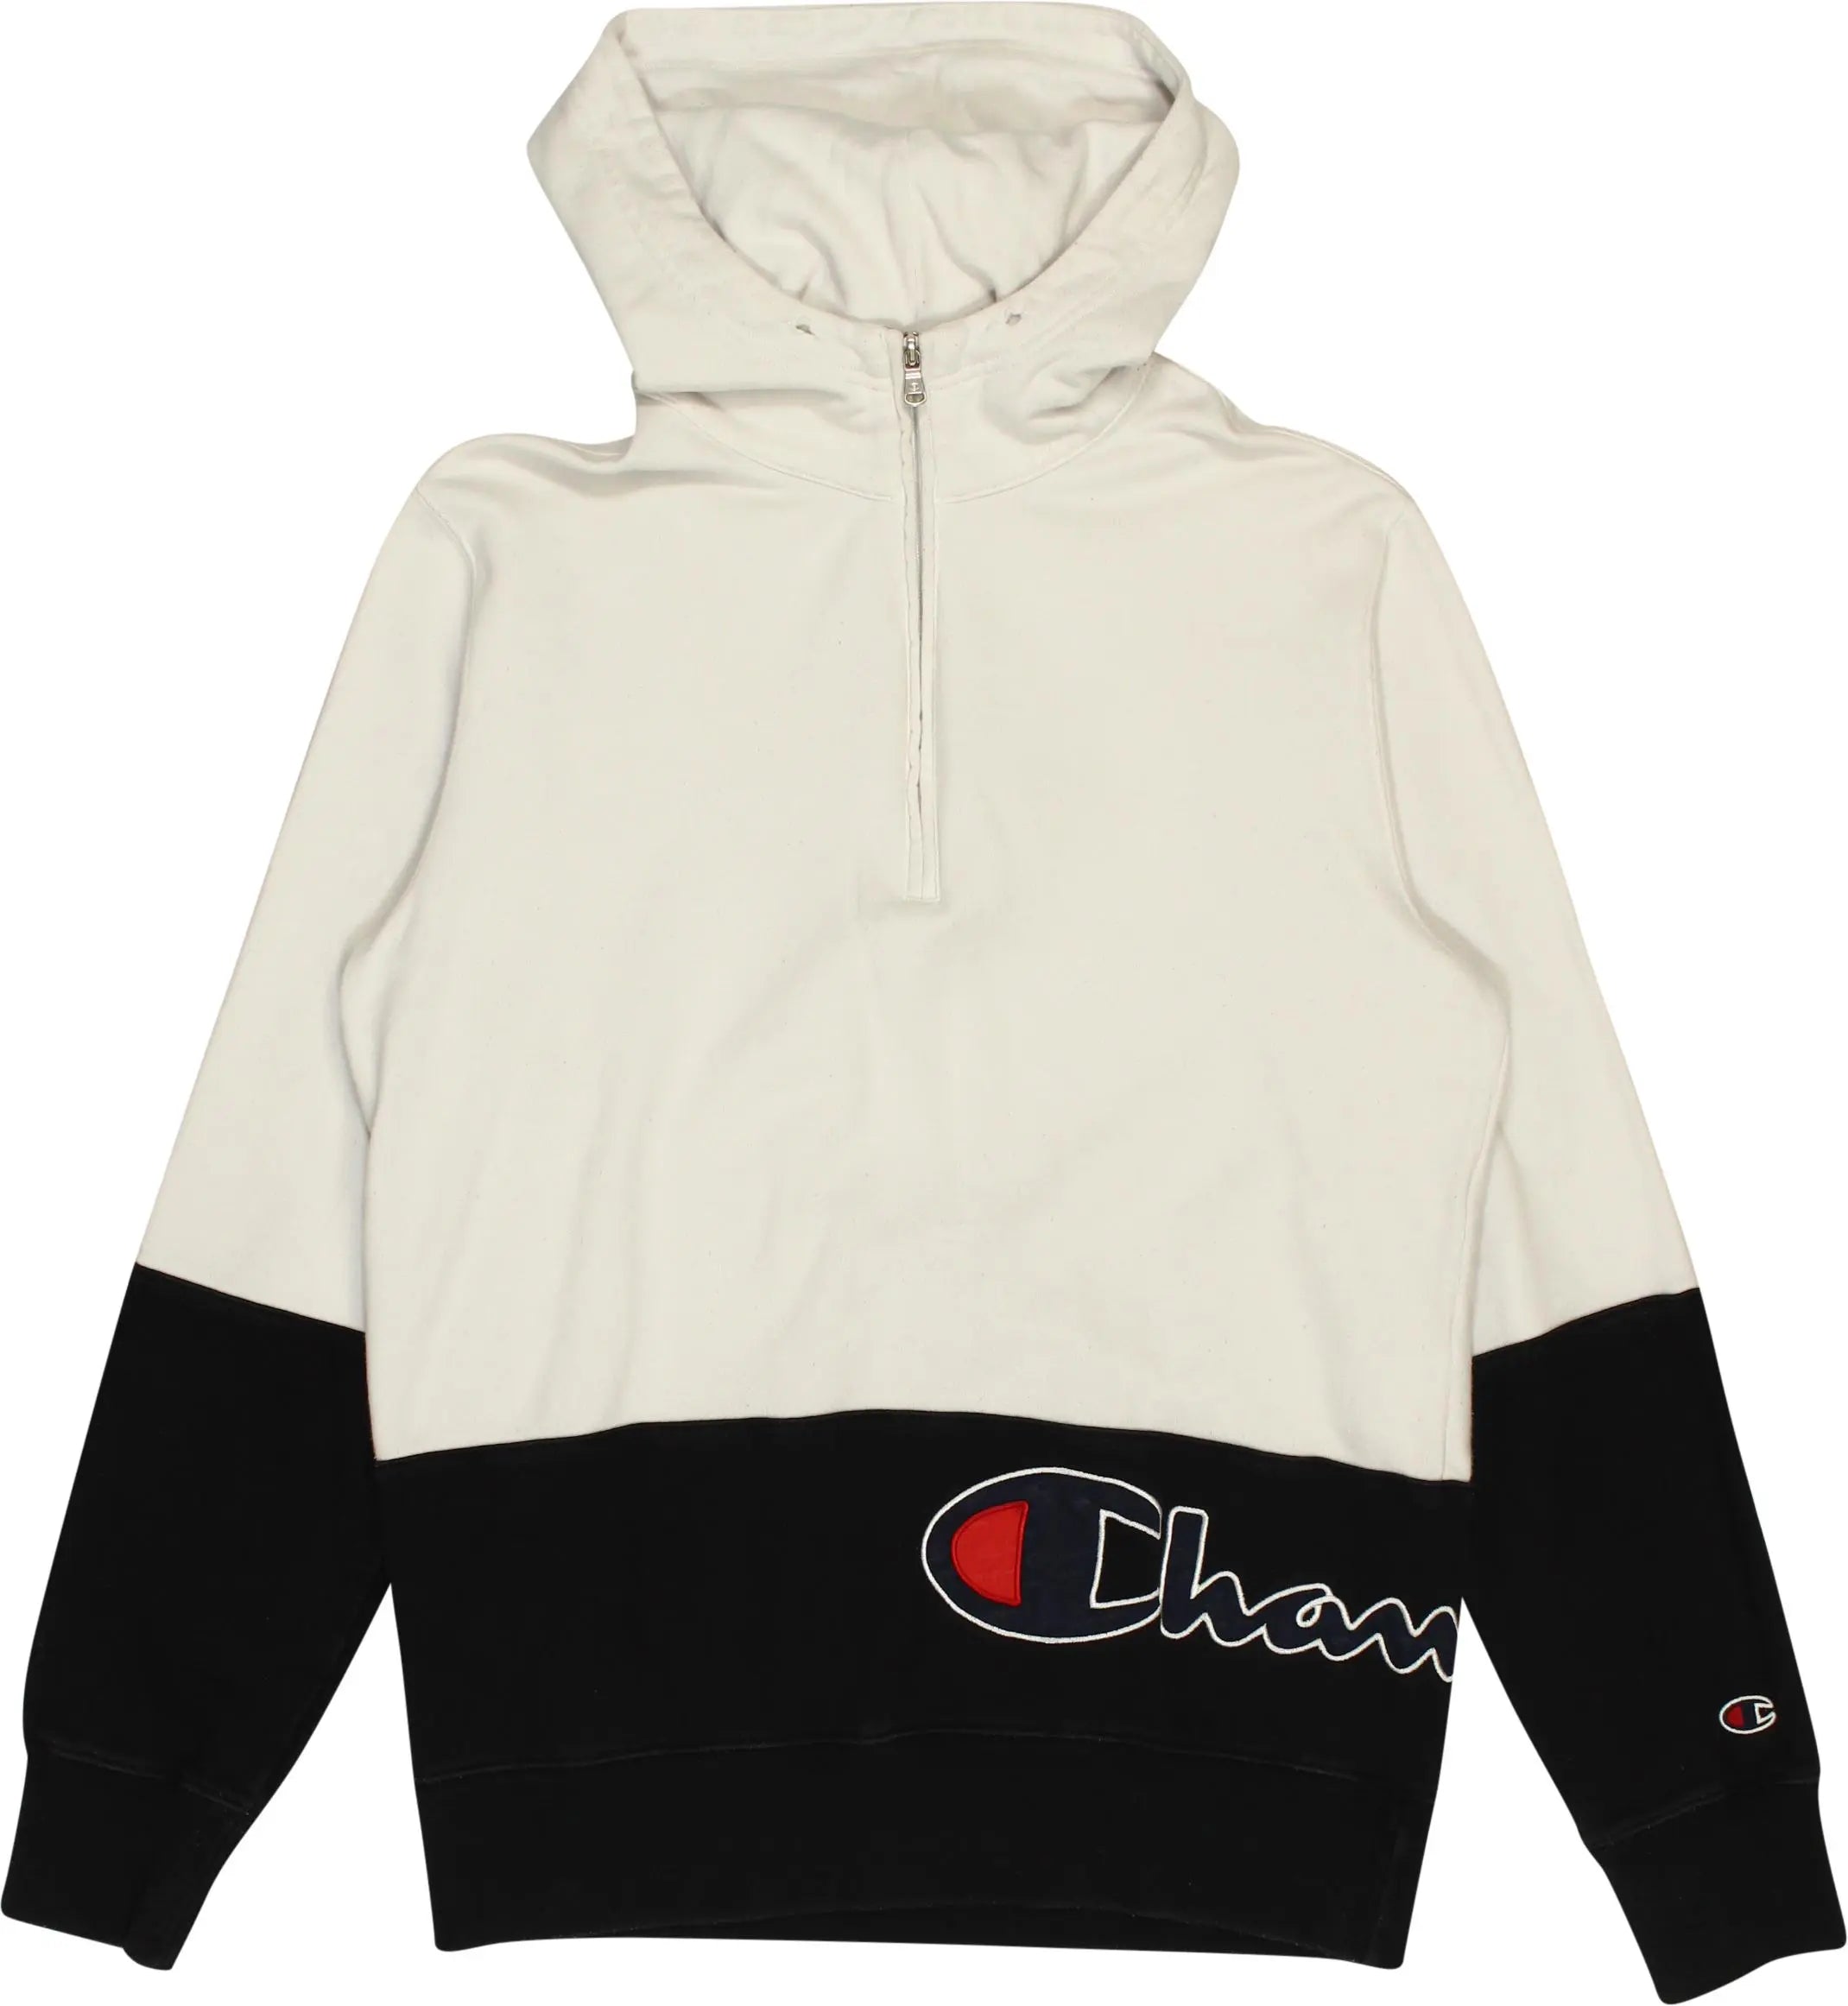 Champion - Hoodie by Champion- ThriftTale.com - Vintage and second handclothing